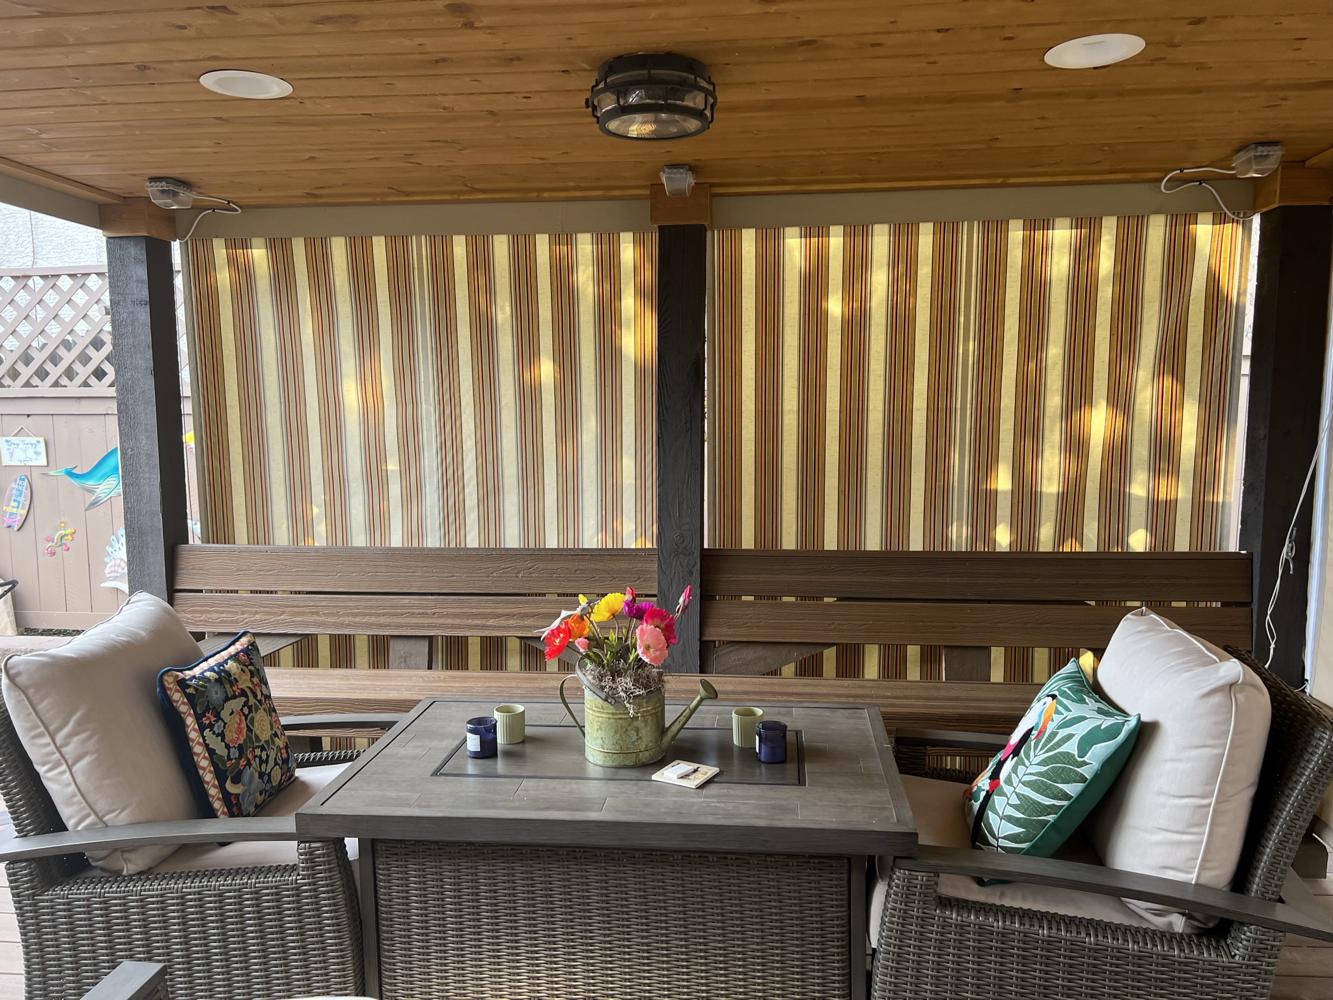 Composite Deck, Pergola & Outdoor Kitchen built by Deck Works in Colorado Springs